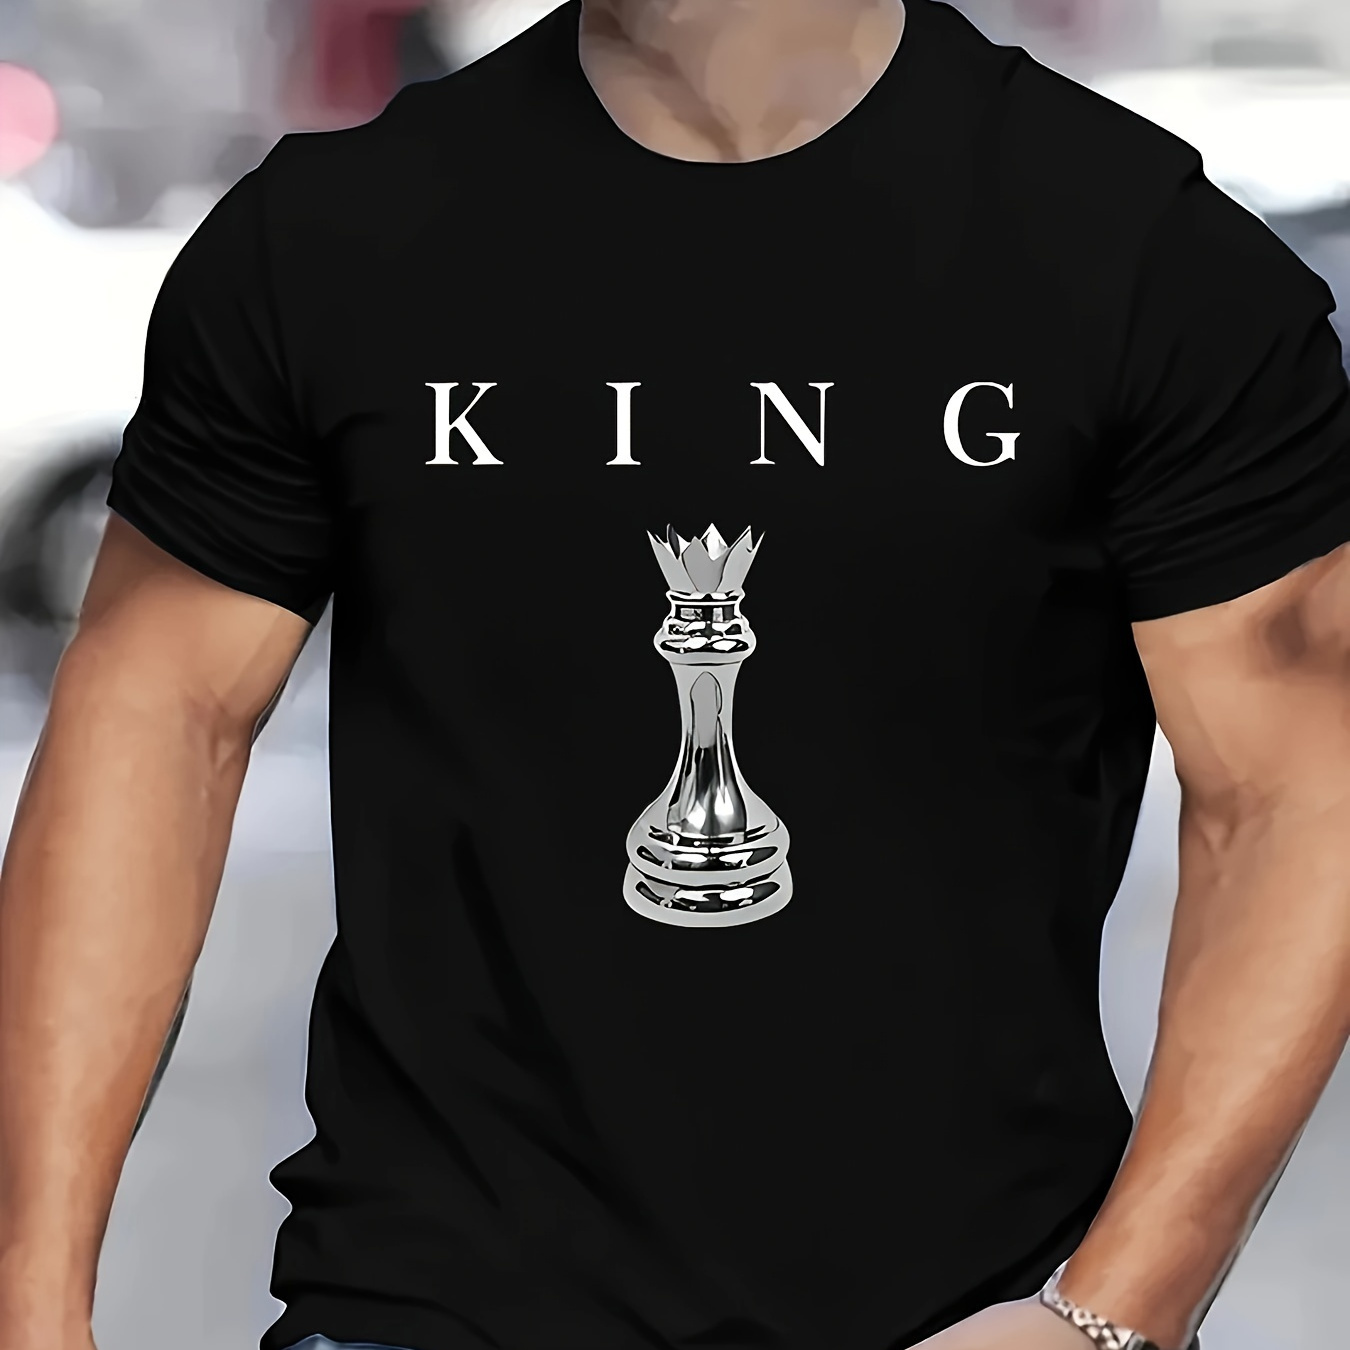 

King Letter Printed T-shirt, Summer And Spring Short-sleeved Round Neck Casual Top, Women's Clothing